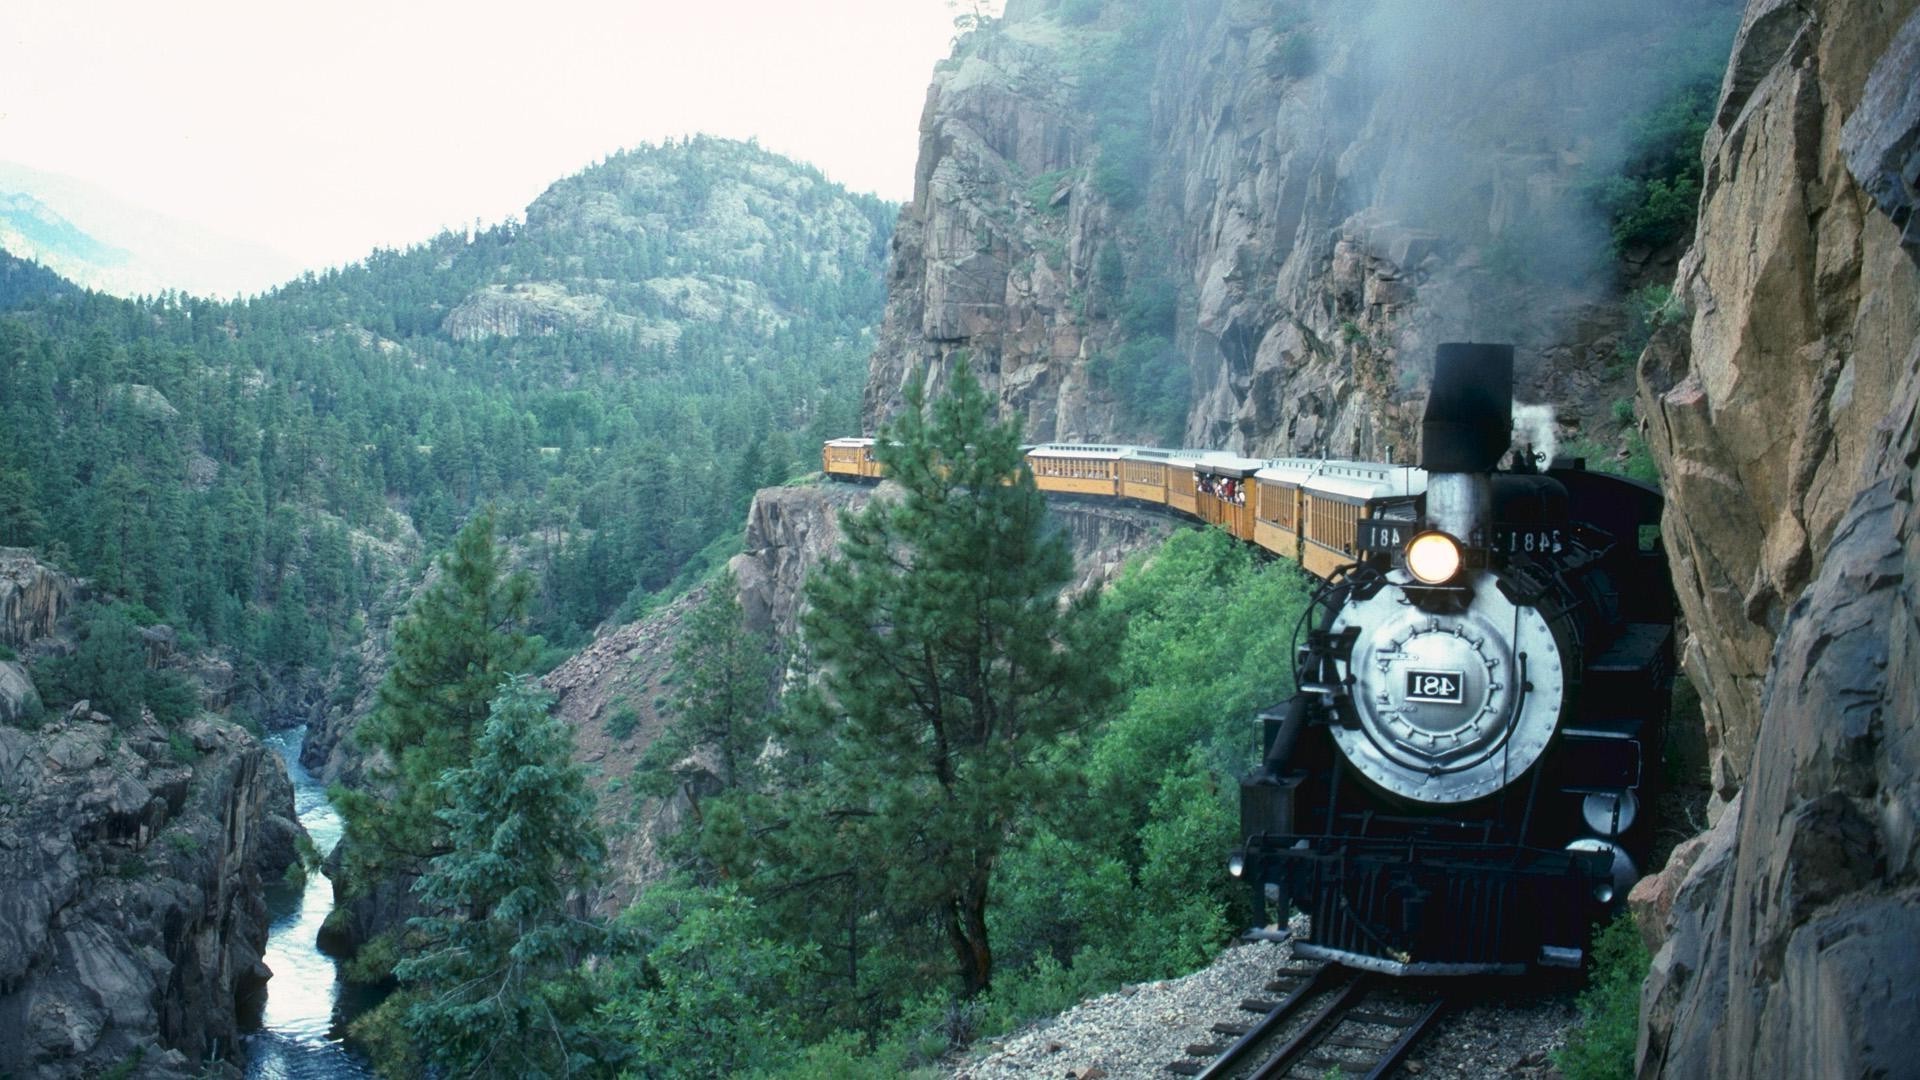 court mountain travel nature landscape rock wood outdoors tourism valley tree summer water sight scenic train